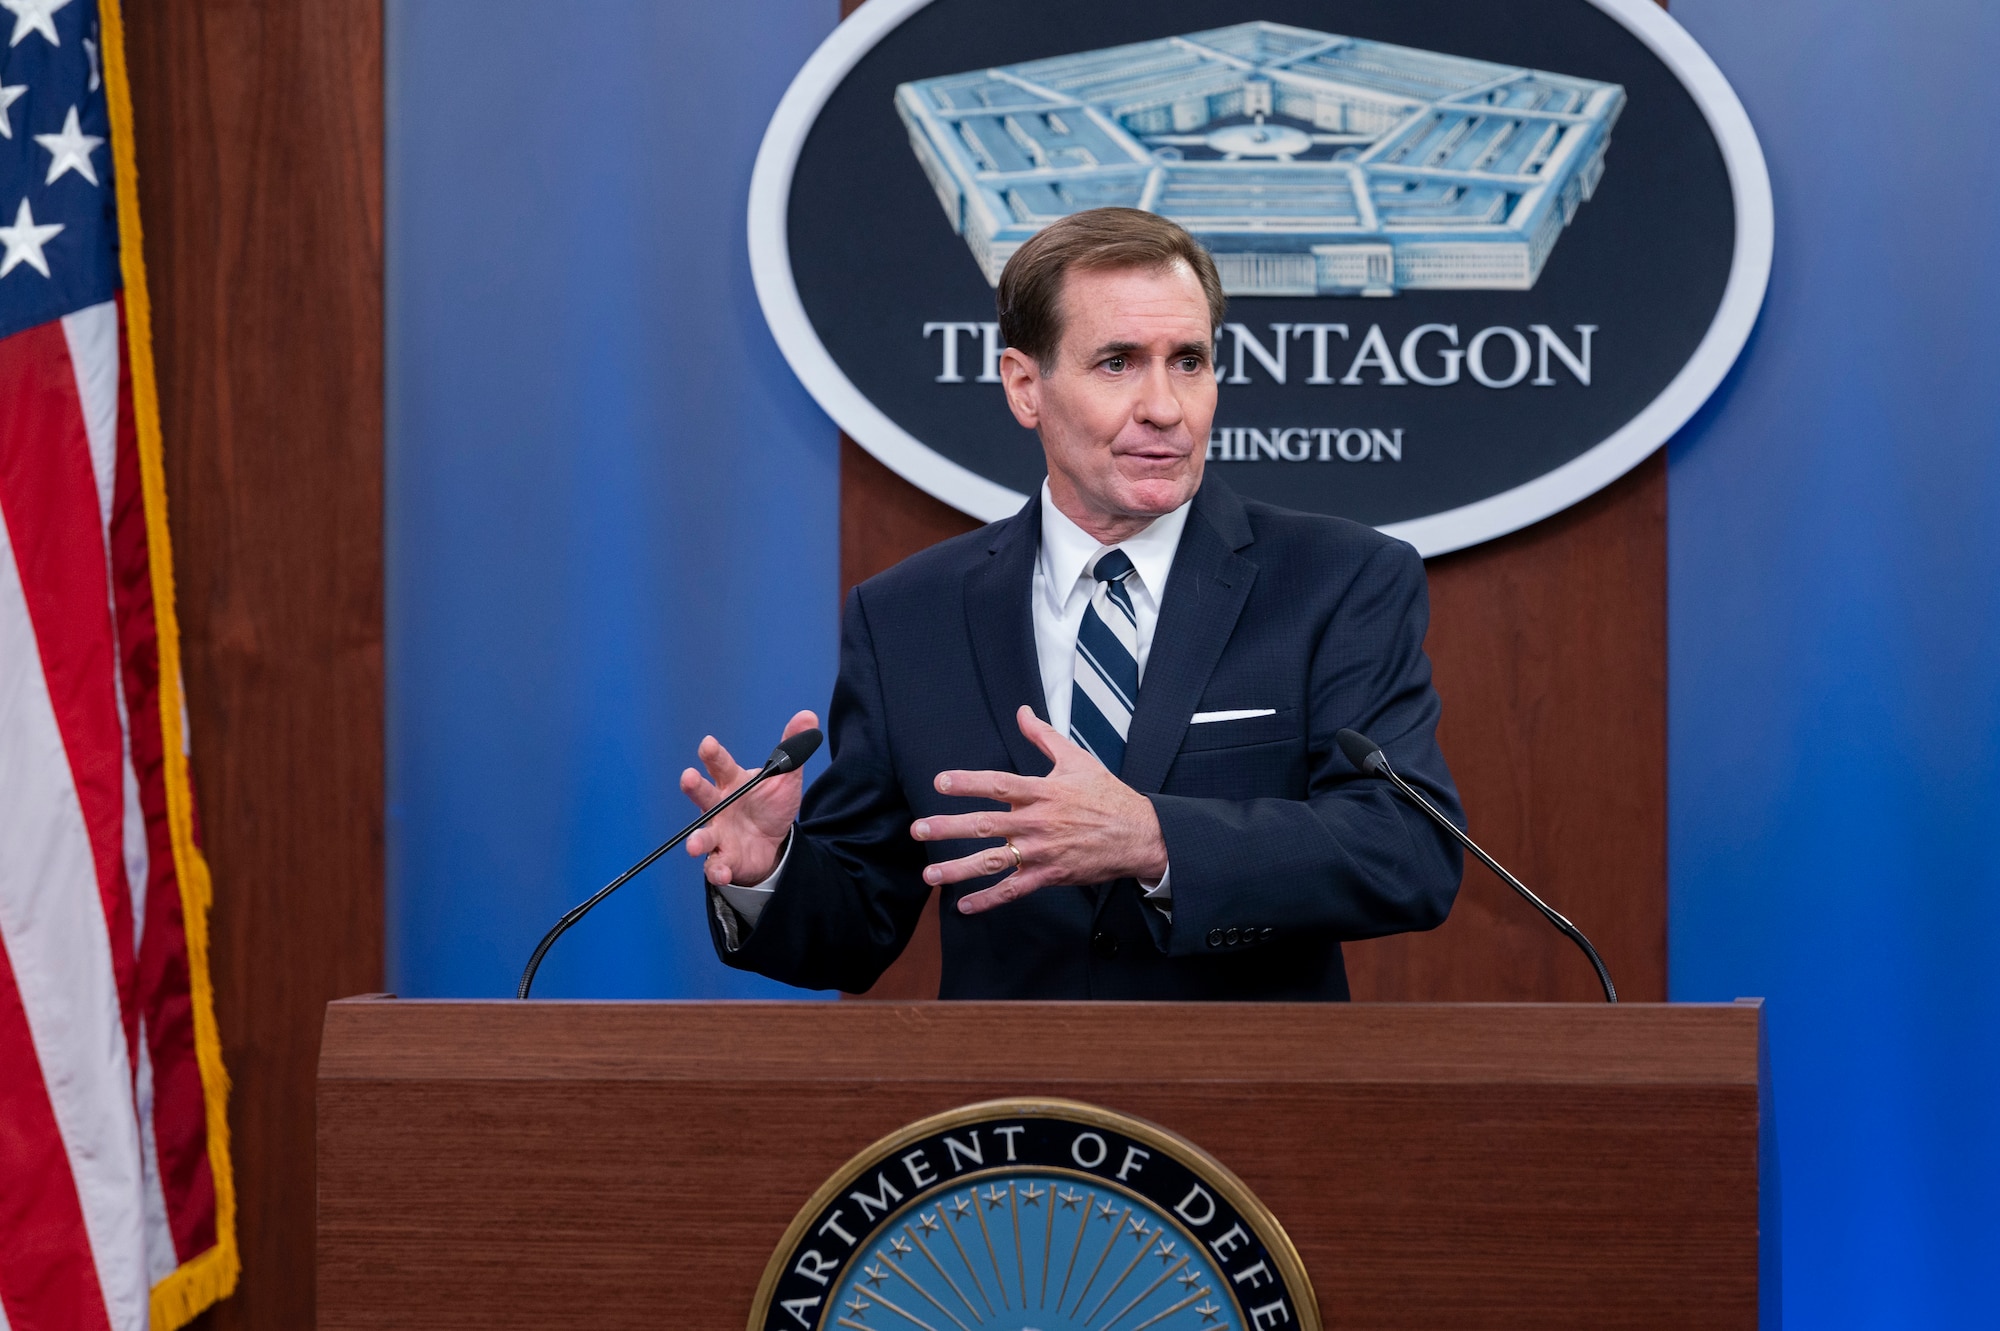 A man stands at a lectern. A sign behind him indicates that he is at the Pentagon.